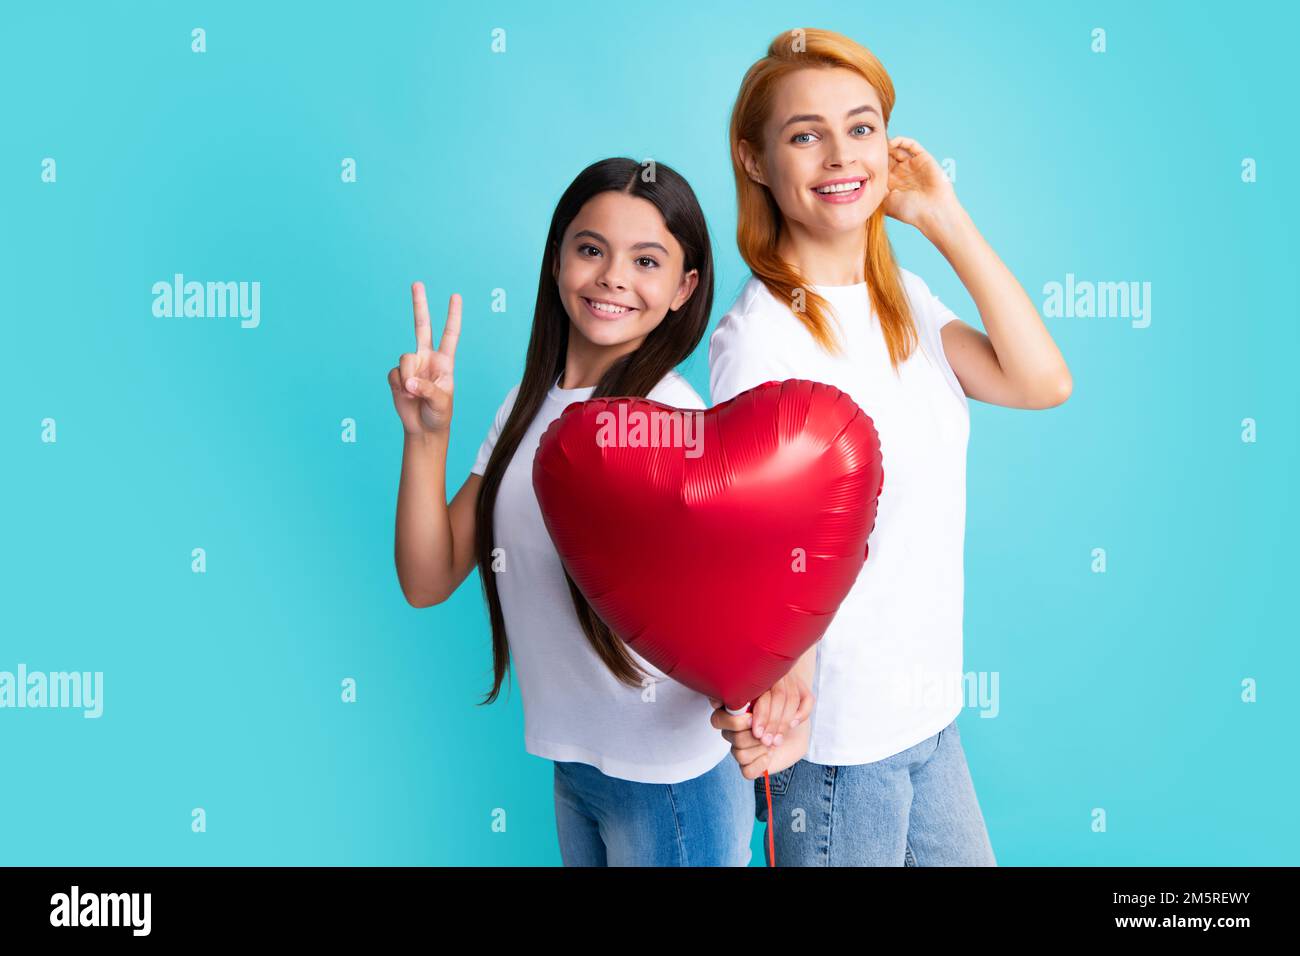 Valentines day. Smiling mother and daughter holding love heart balloon on blue background. Happy Valentines day to my mom. Stock Photo